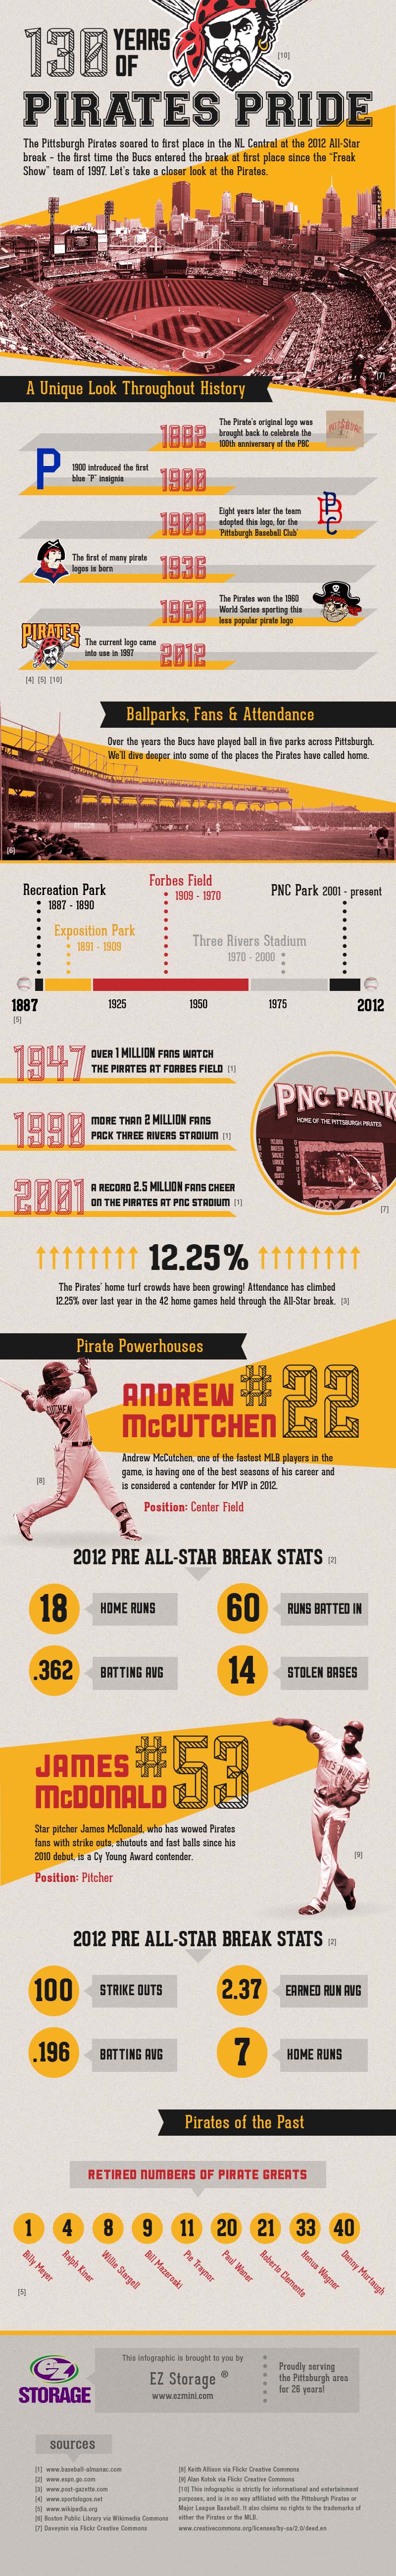 130 Years of Pirates Pride